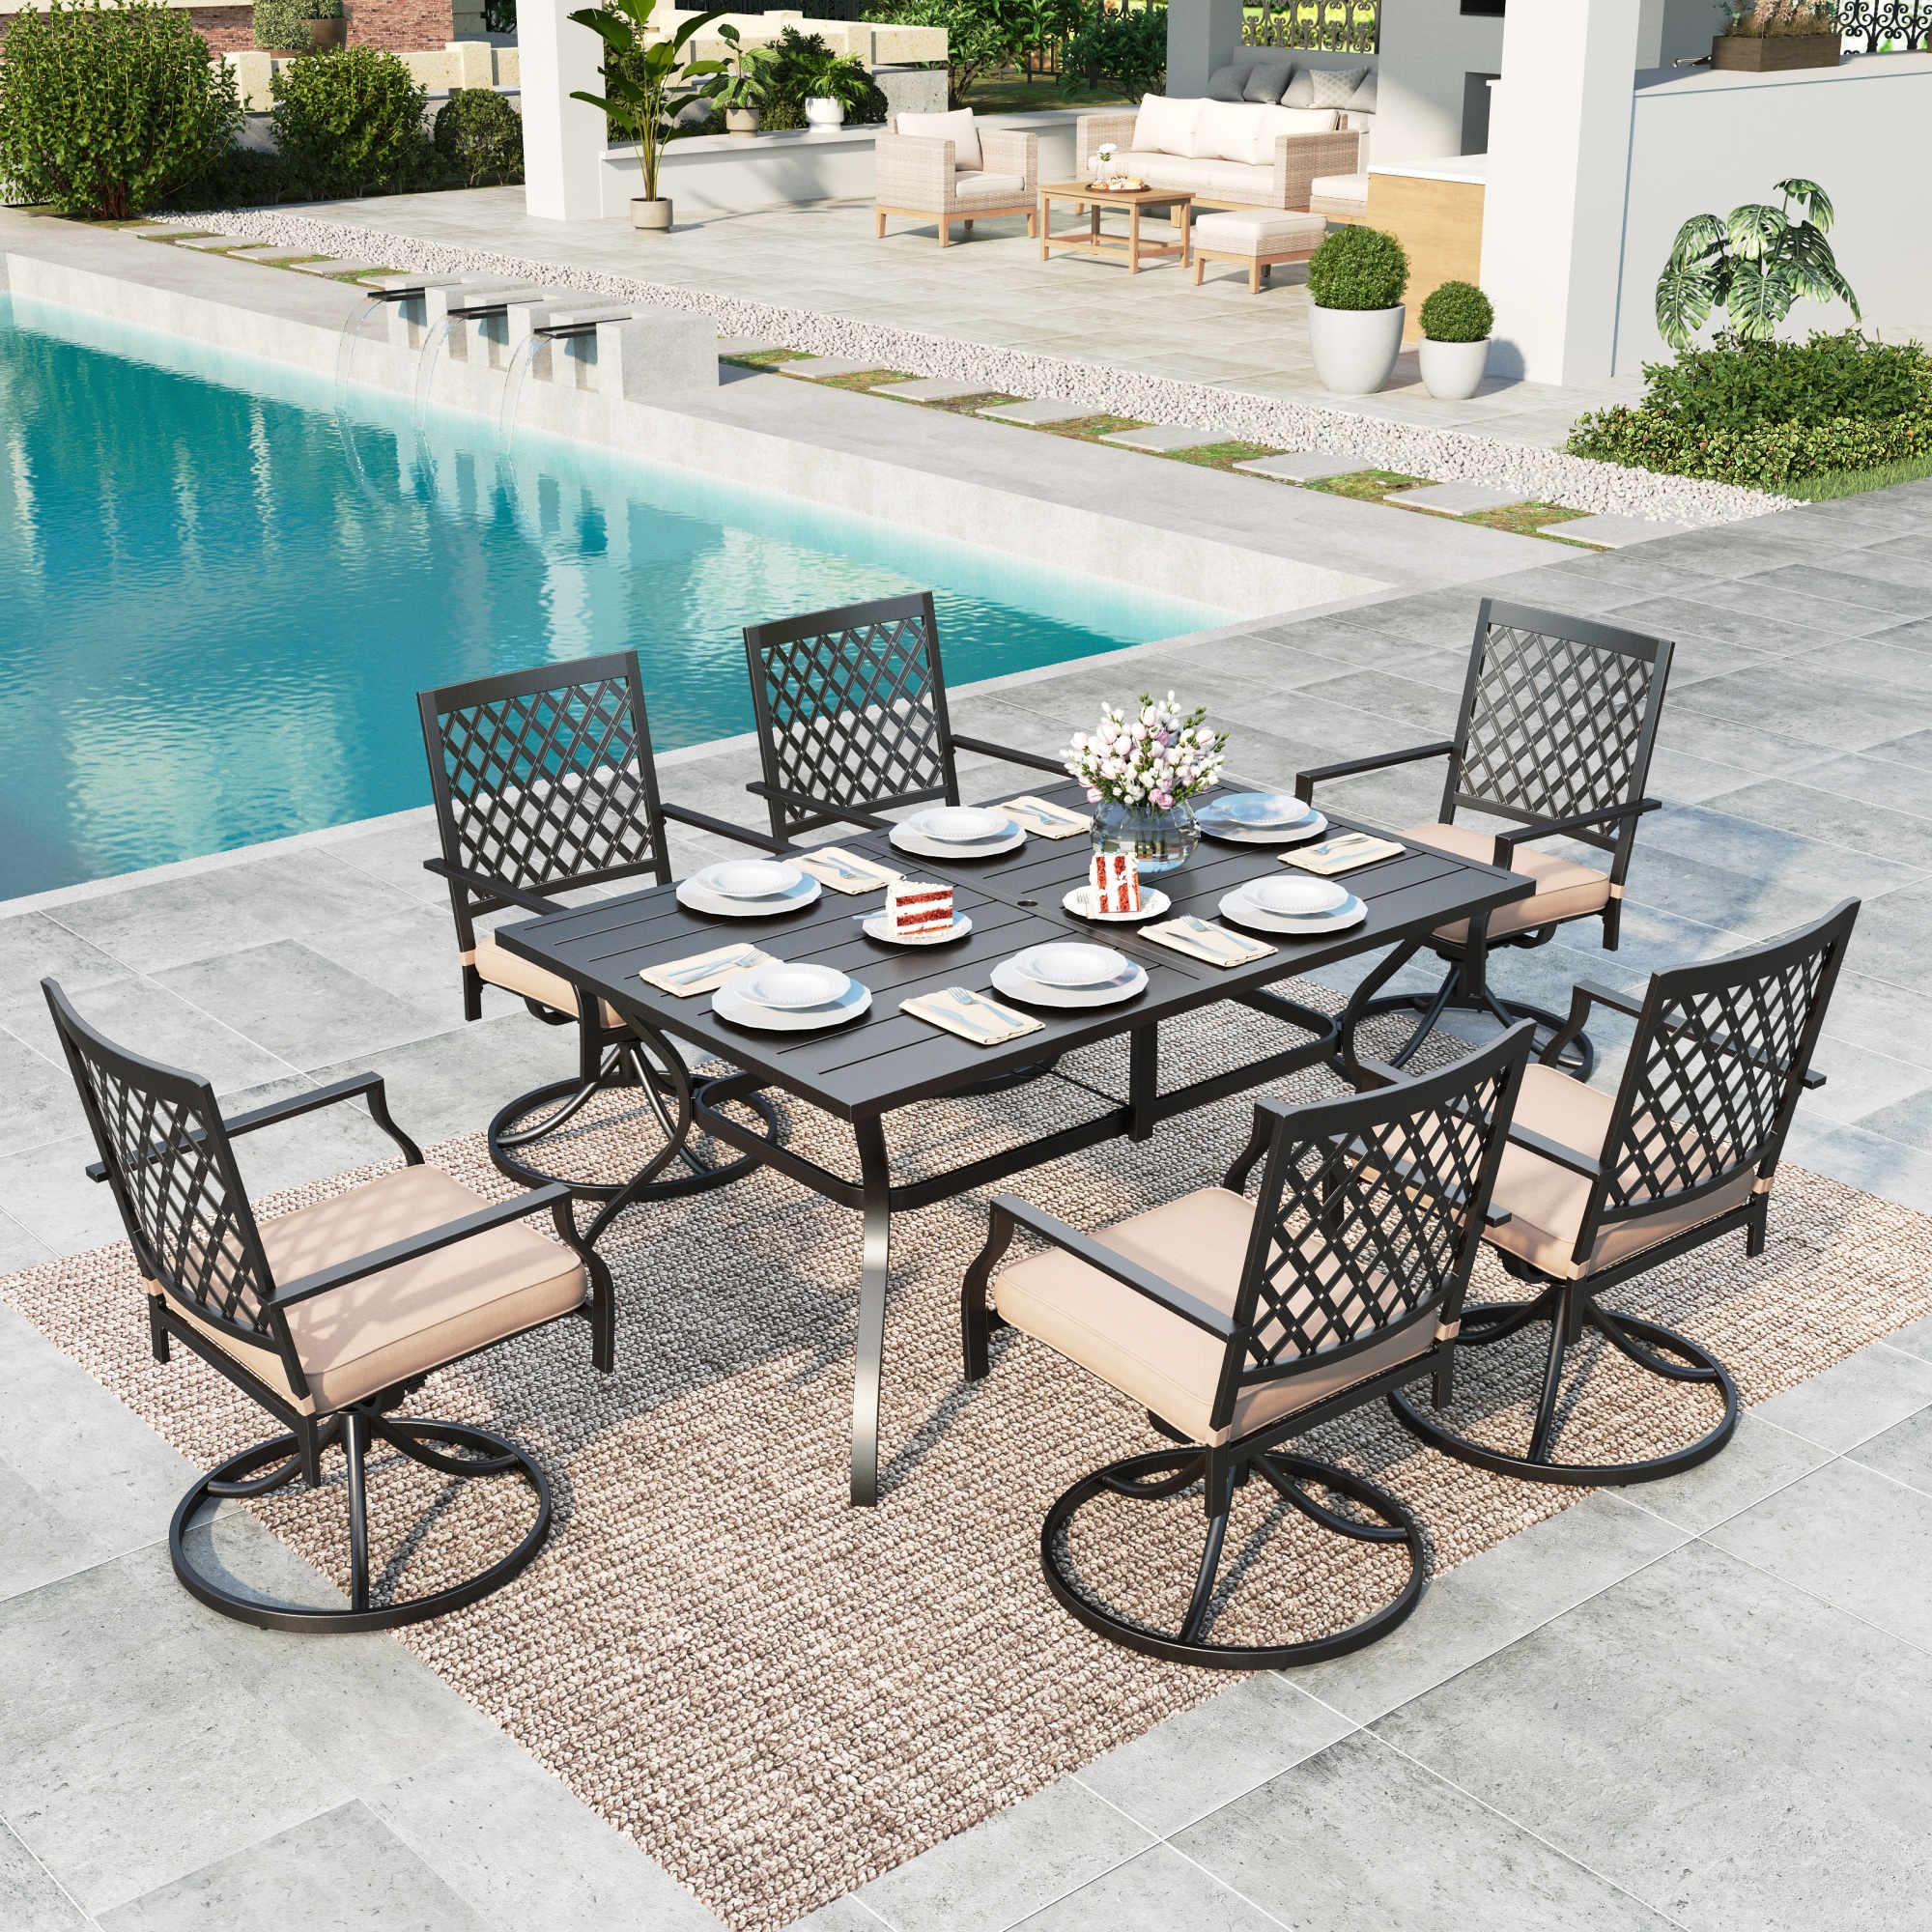 MF Studio 7 Piece Outdoor Patio Dining Set Metal Furniture with 6 Swivel Padded Chairs and 1 Rectangular Dining Table, Beige Cushion - image 1 of 18